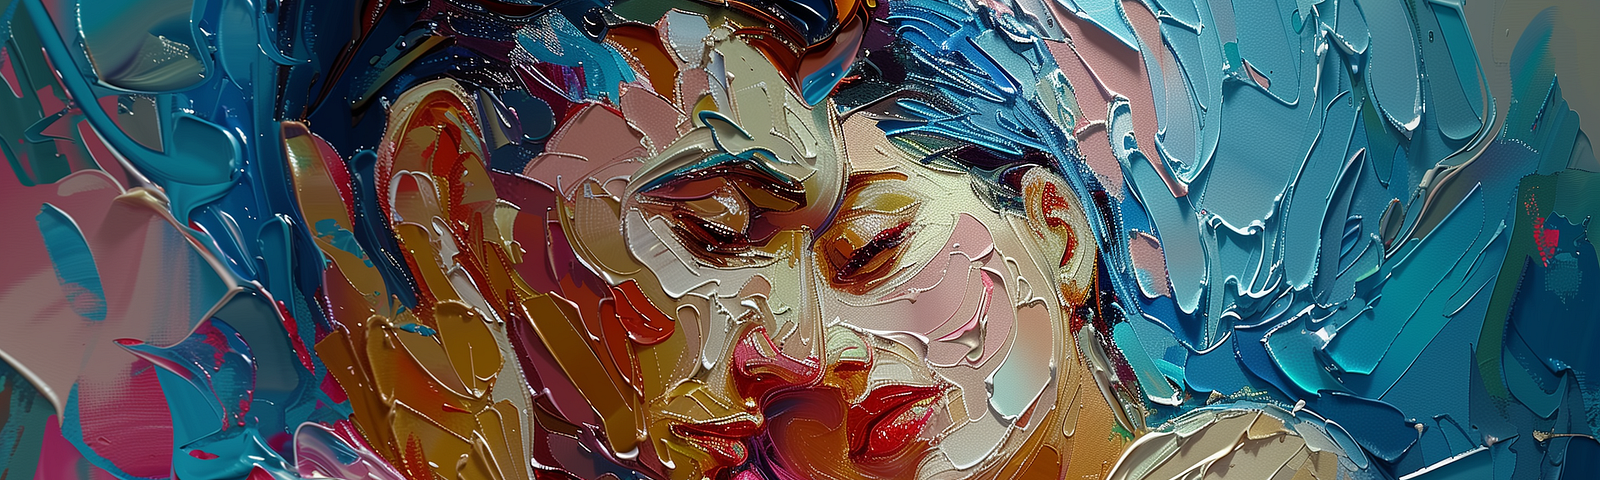 An expressive oil painting of a couple embracing, their faces and bodies blending into each other with swirling brushstrokes in blues, pinks, and warm tones, representing the fluid and eternal connection of their love.